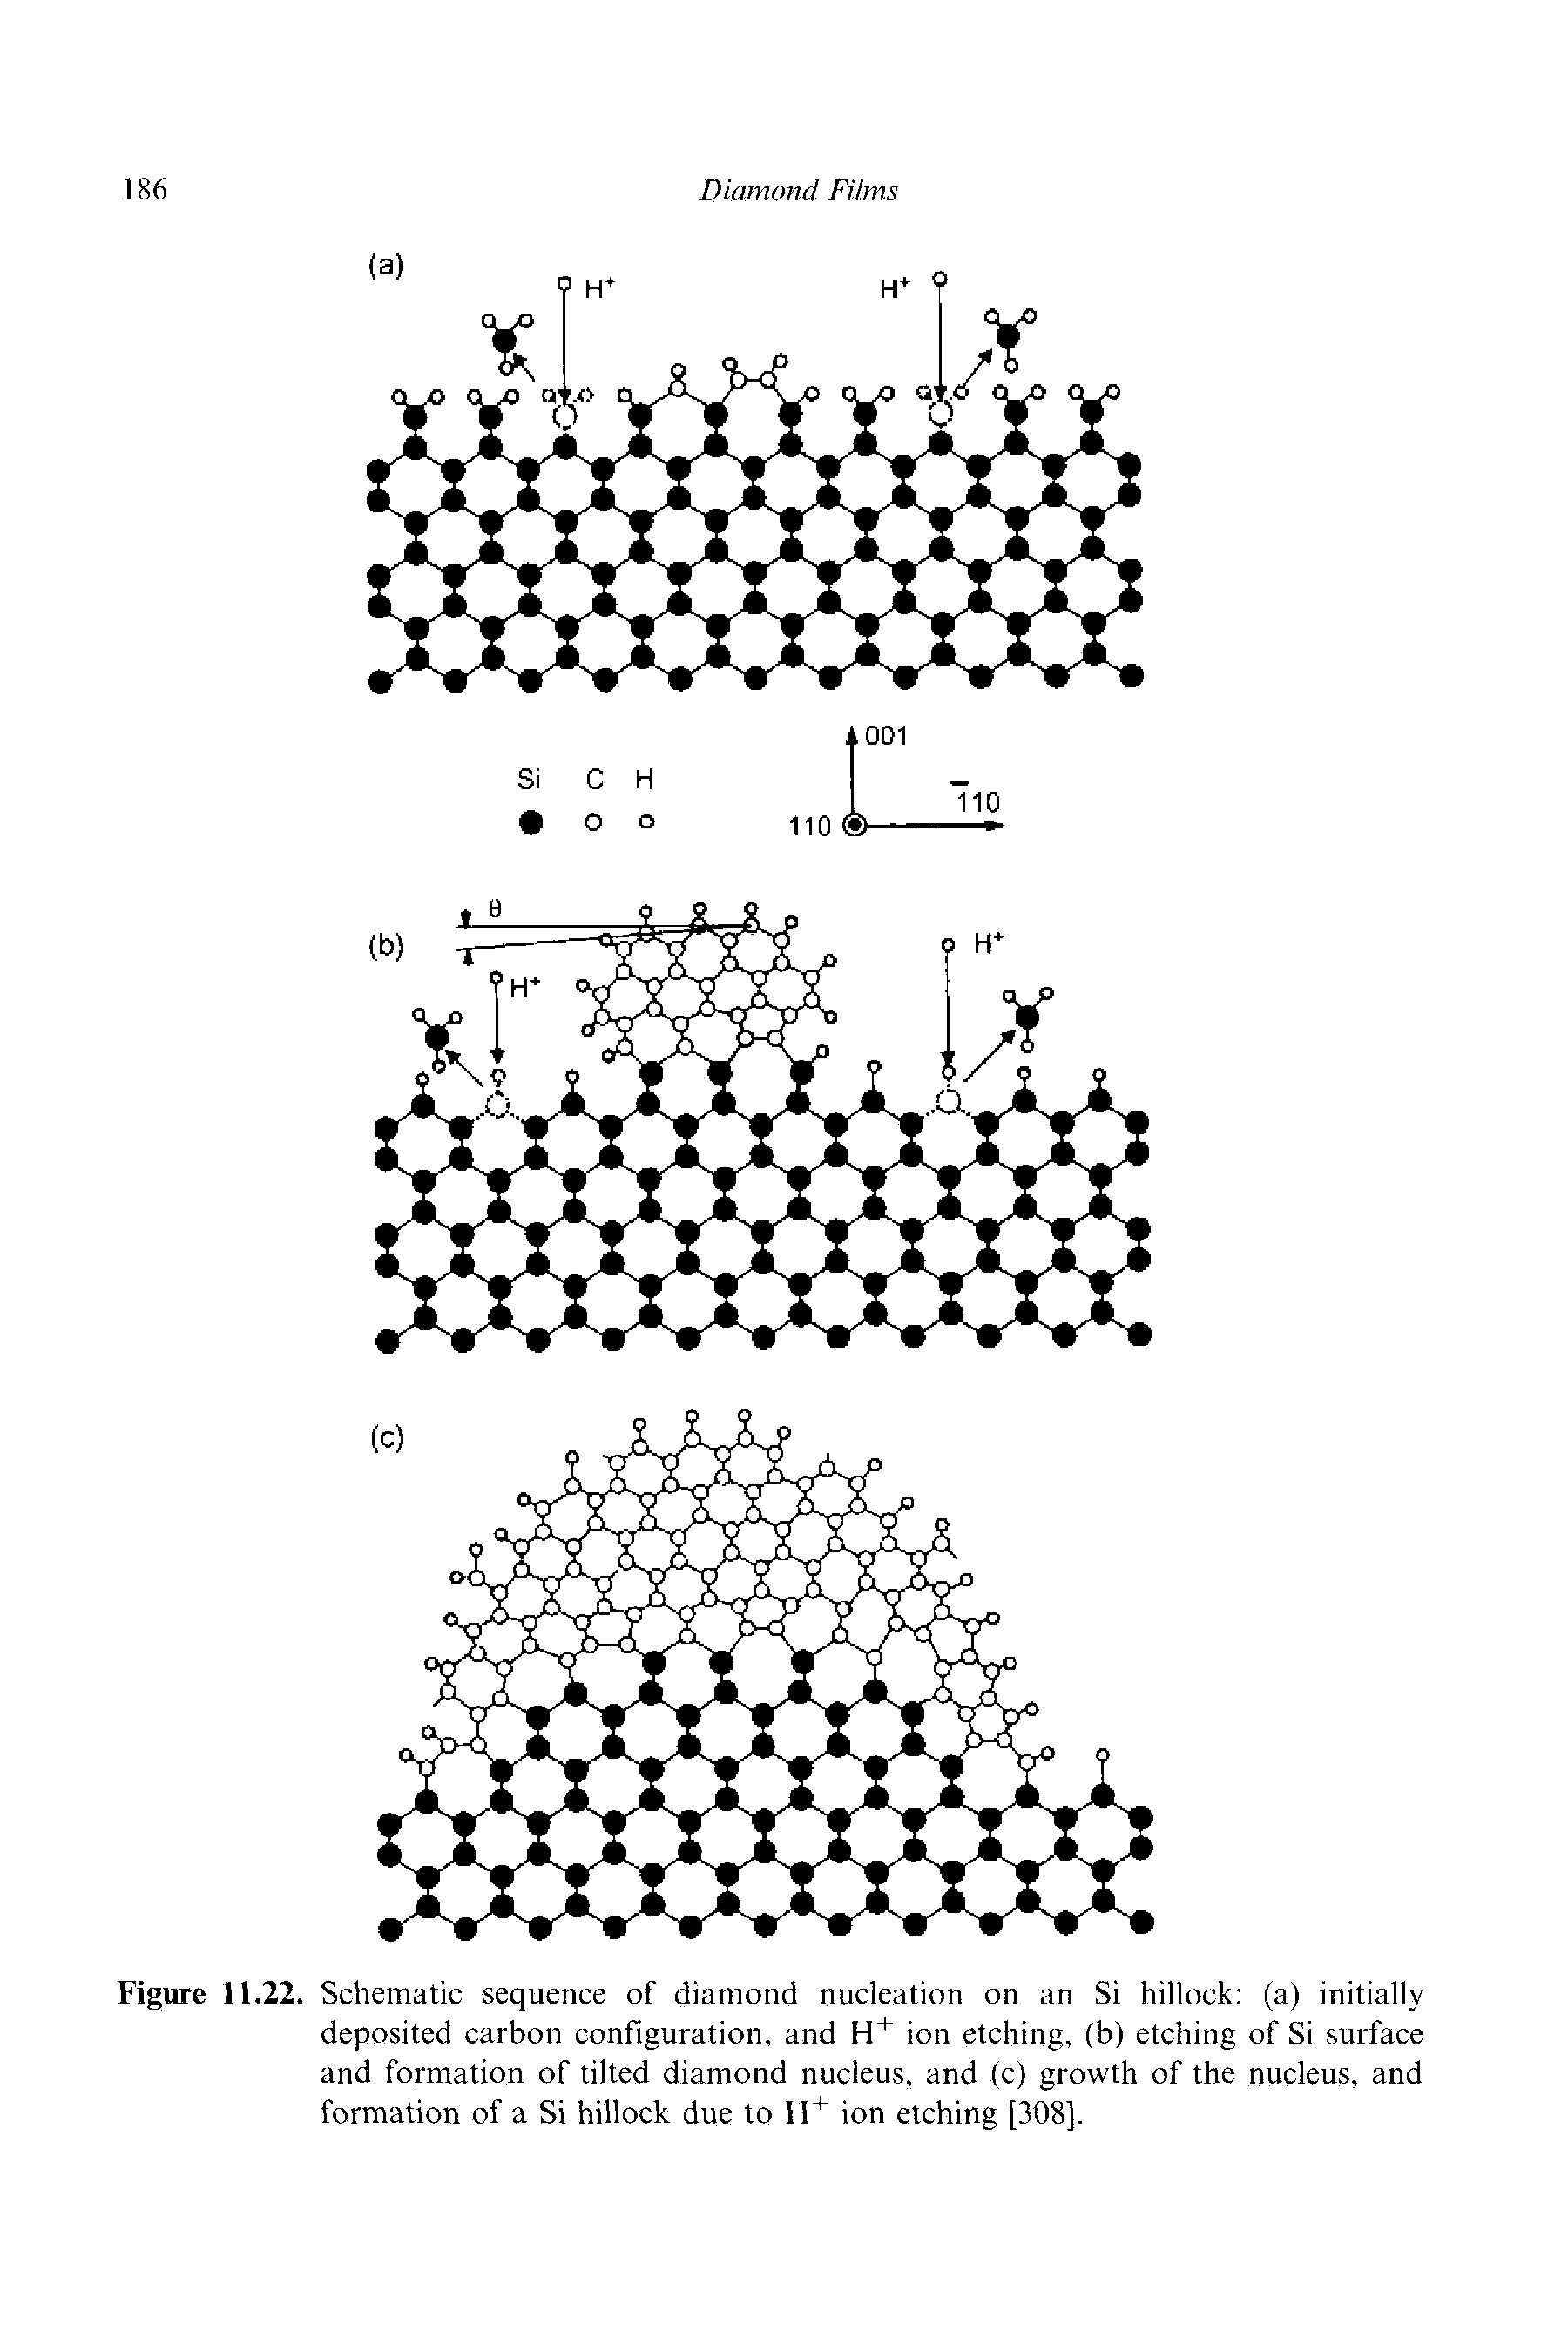 Figure 11.22. Schematic sequence of diamond nucleation on an Si hillock (a) initially deposited carbon configuration, and H ion etching, (b) etching of Si surface and formation of tilted diamond nucleus, and (c) growth of the nucleus, and formation of a Si hillock due to H+ ion etching [308],...